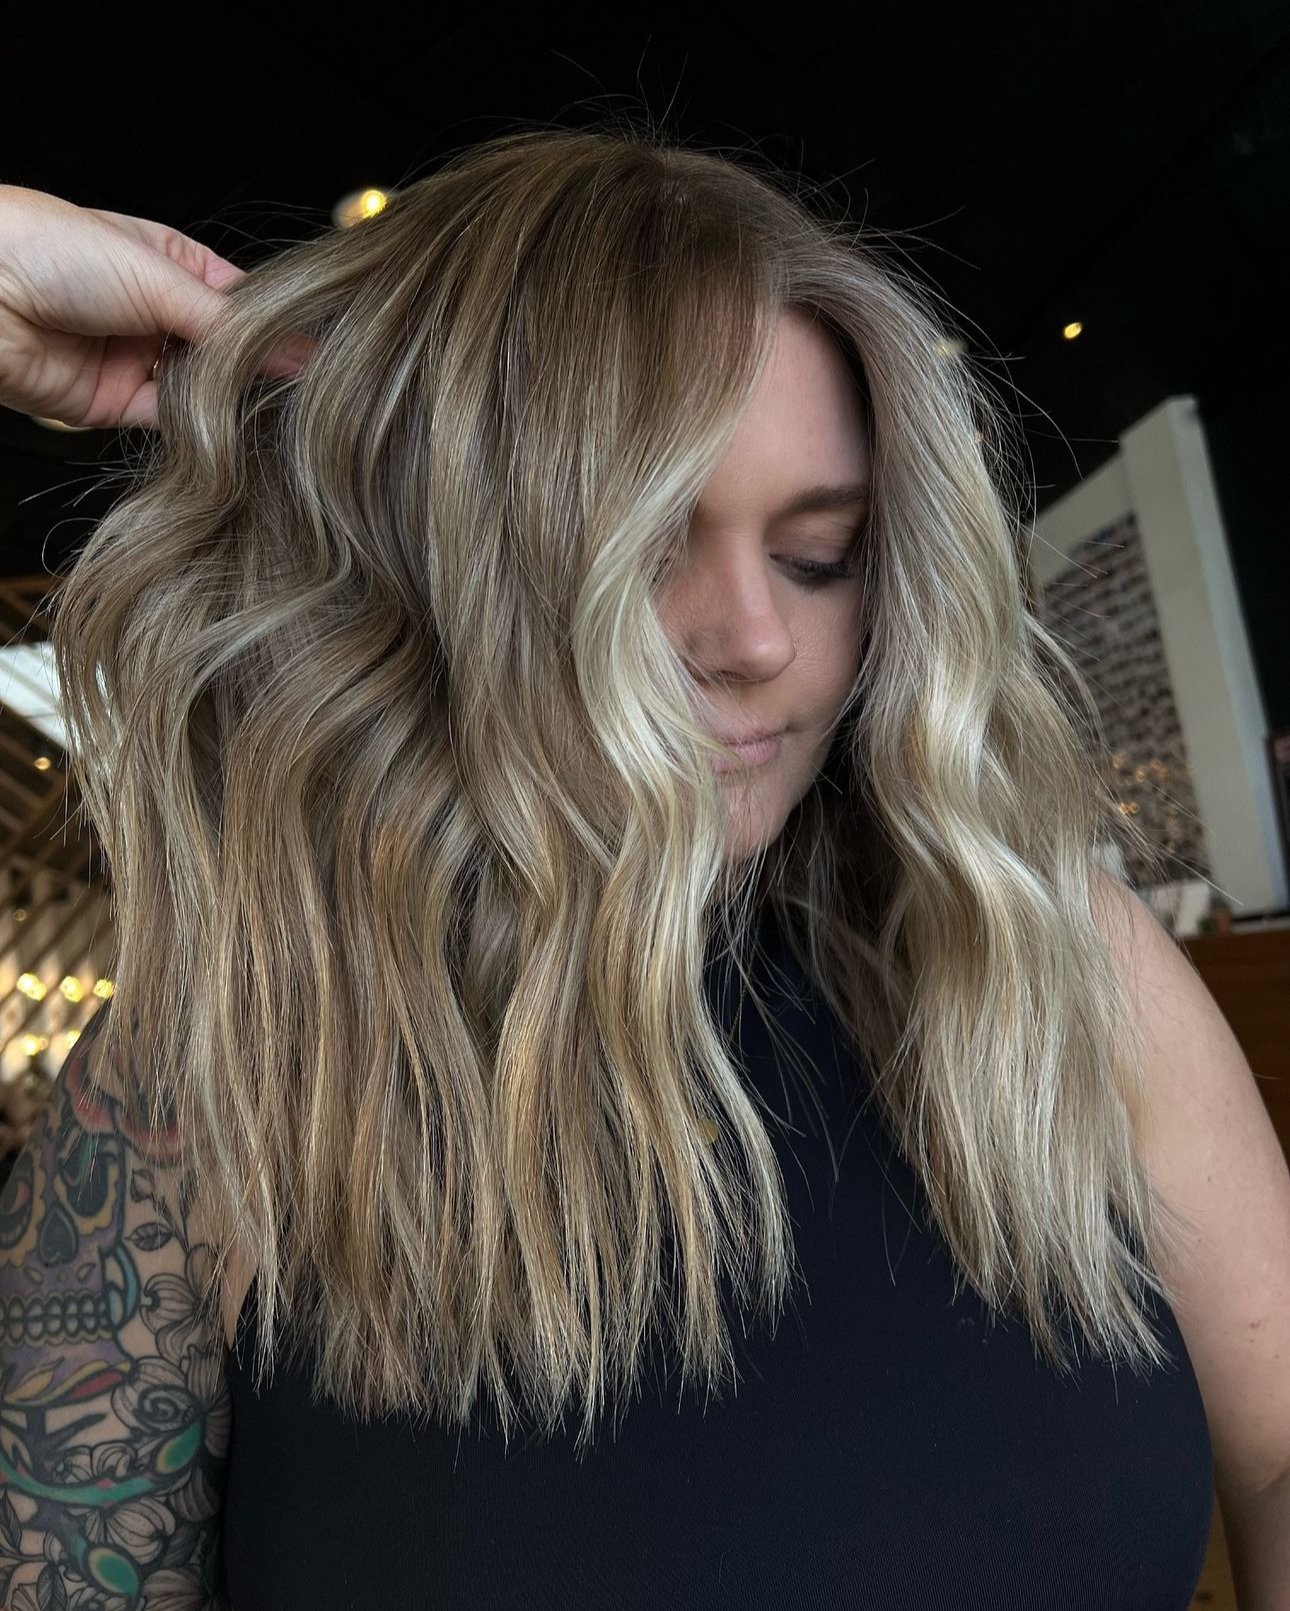 Beach Hair: A C T I V A T E D 🏝

If your hair is in need of some beach vibes, you need to snag a spot on Skyler's schedule ASAP!

If you are liking Skyler's vibe, comment vibe and we'll send you the link to get on her books ⚡ 

#raleighblondespecial